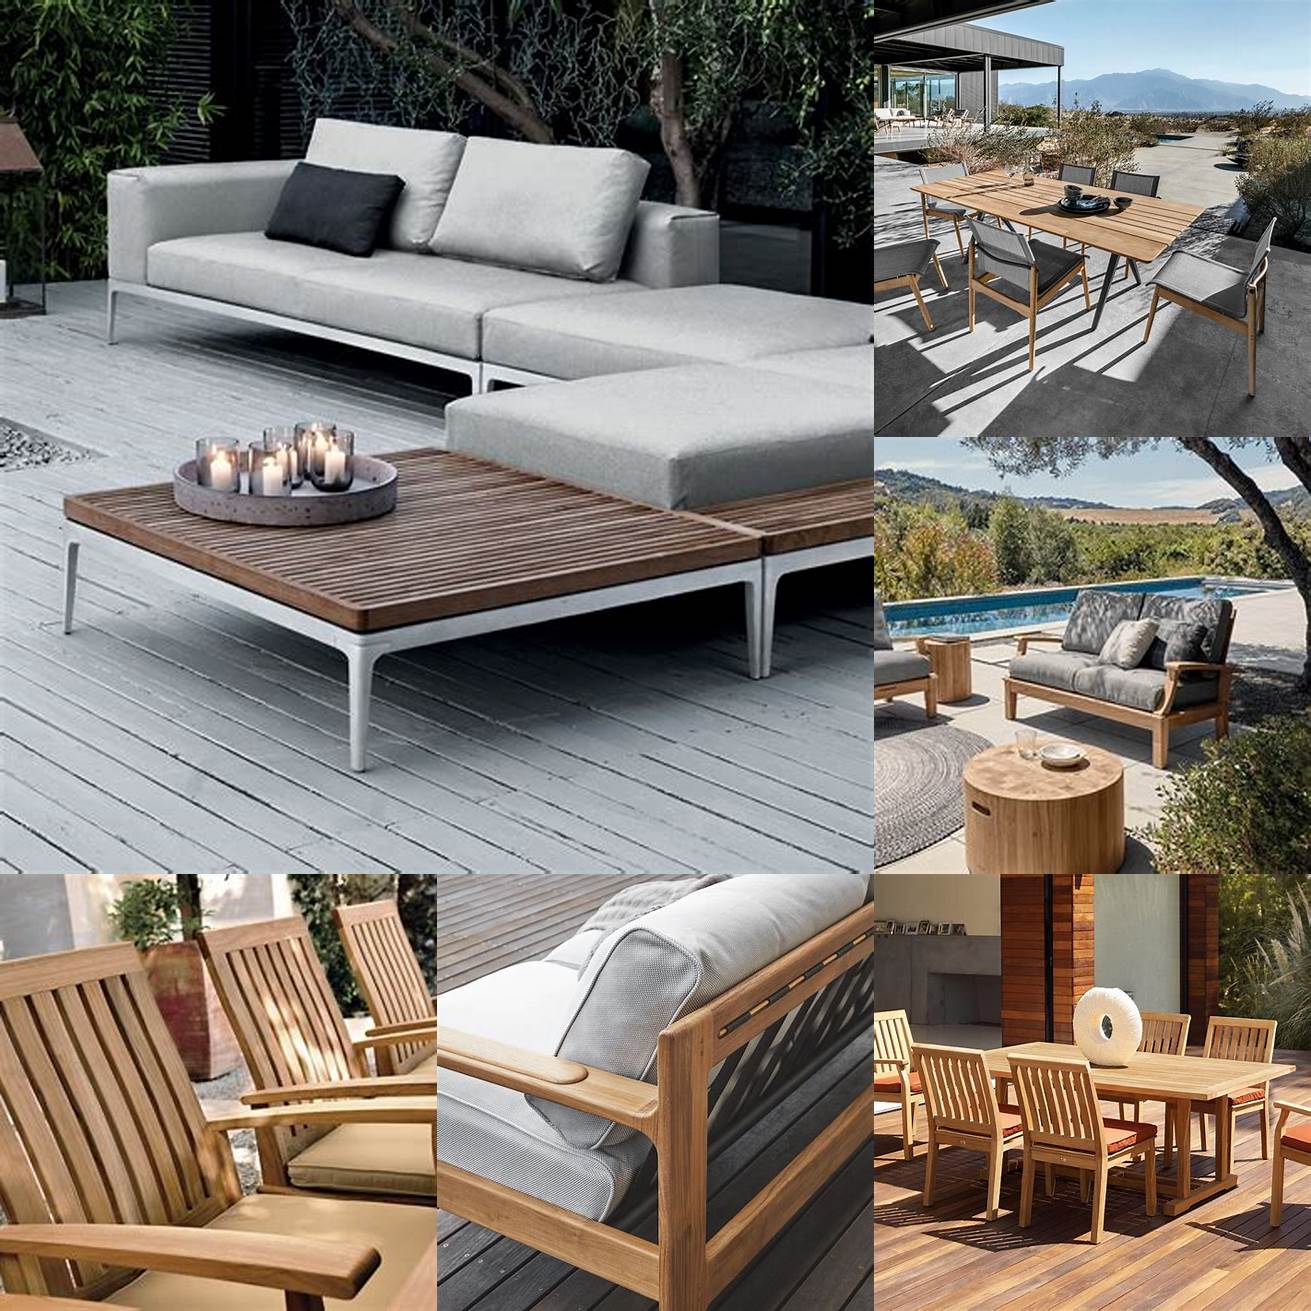 A picture of a Gloster teak furniture set with a view